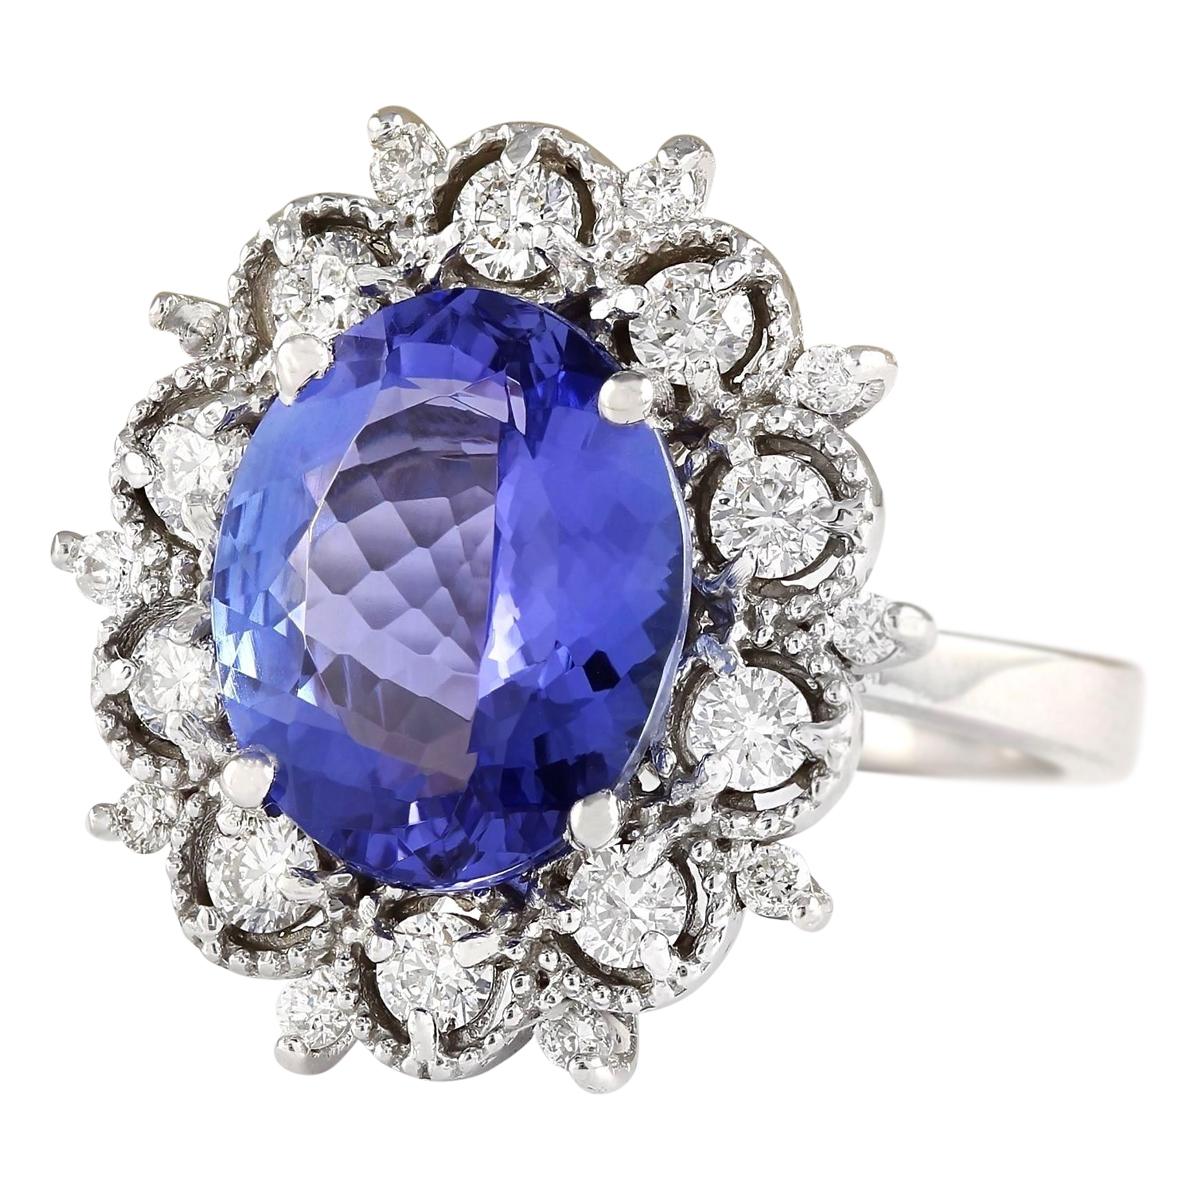 Presenting our captivating 6.47 Carat Natural Tanzanite 14 Karat White Gold Diamond Ring, a masterpiece of luxury and elegance. Crafted from exquisite 14K white gold and stamped for authenticity, this ring is a symbol of sophistication. At its heart